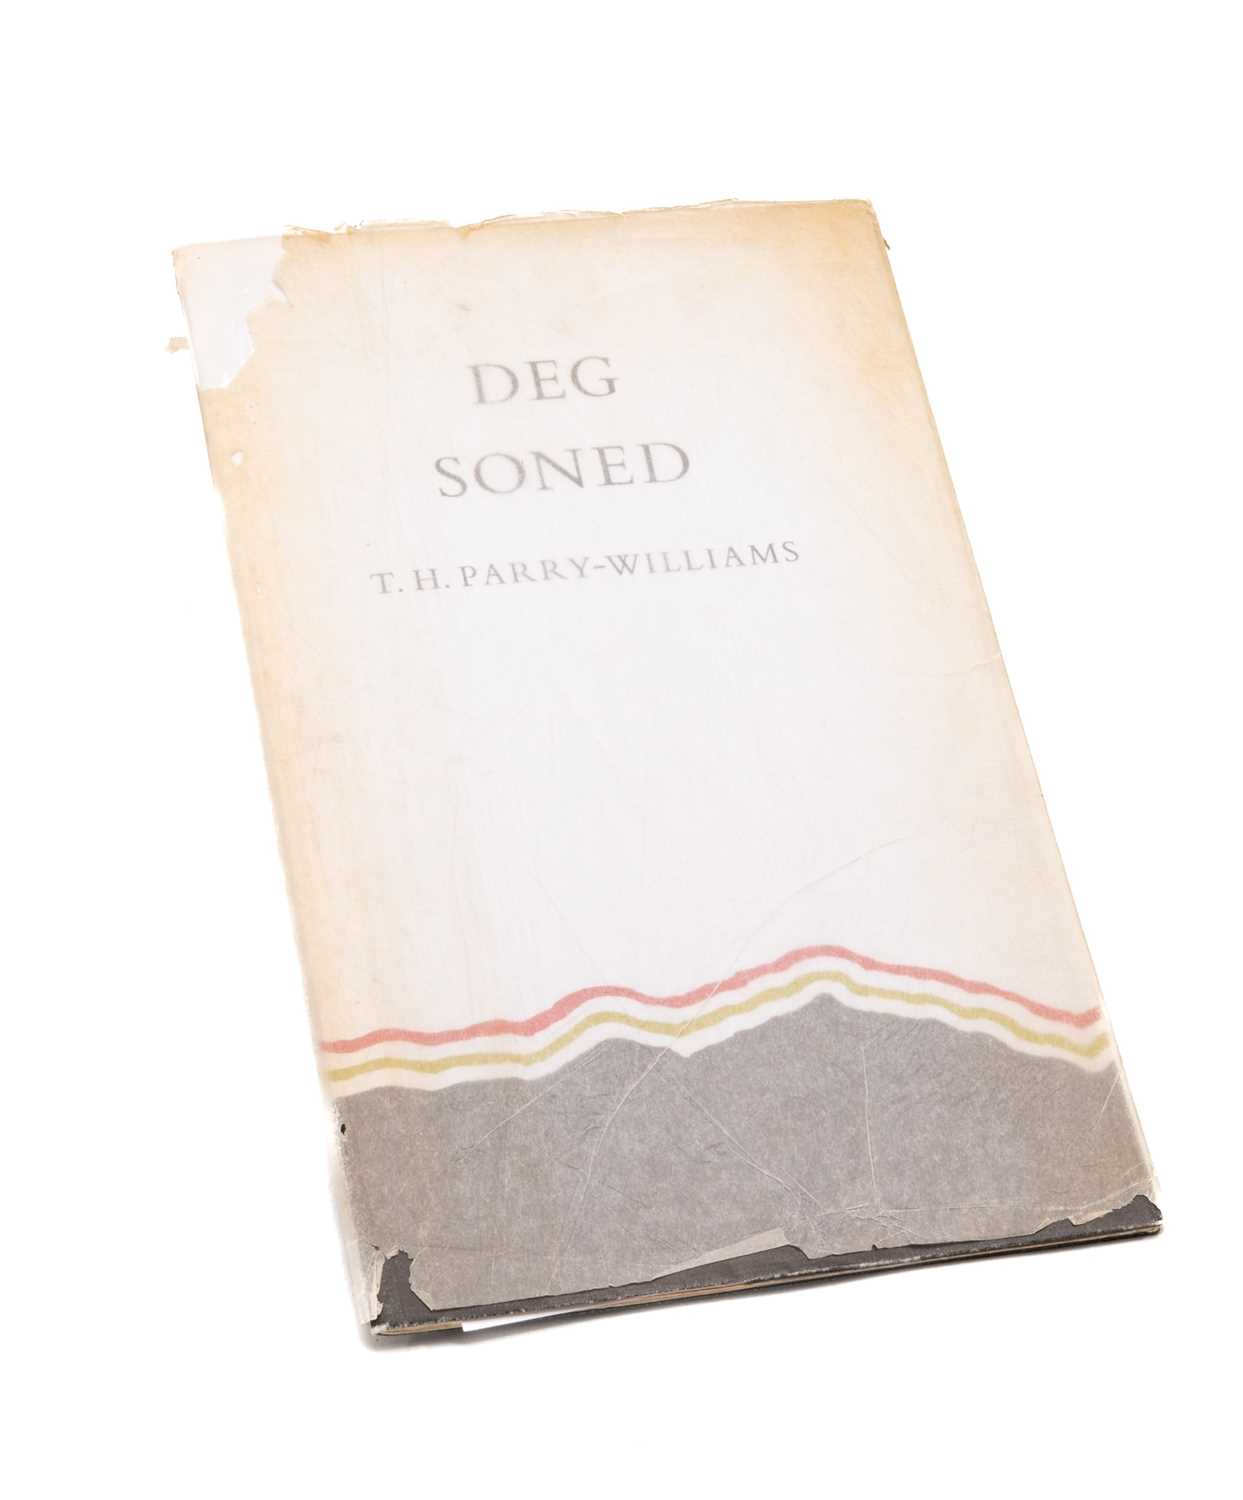 PARRY-WILLIAMS (T.H.) 'Deg Soned', limited edition (17/270) copy from Gregynog Press 1987, all